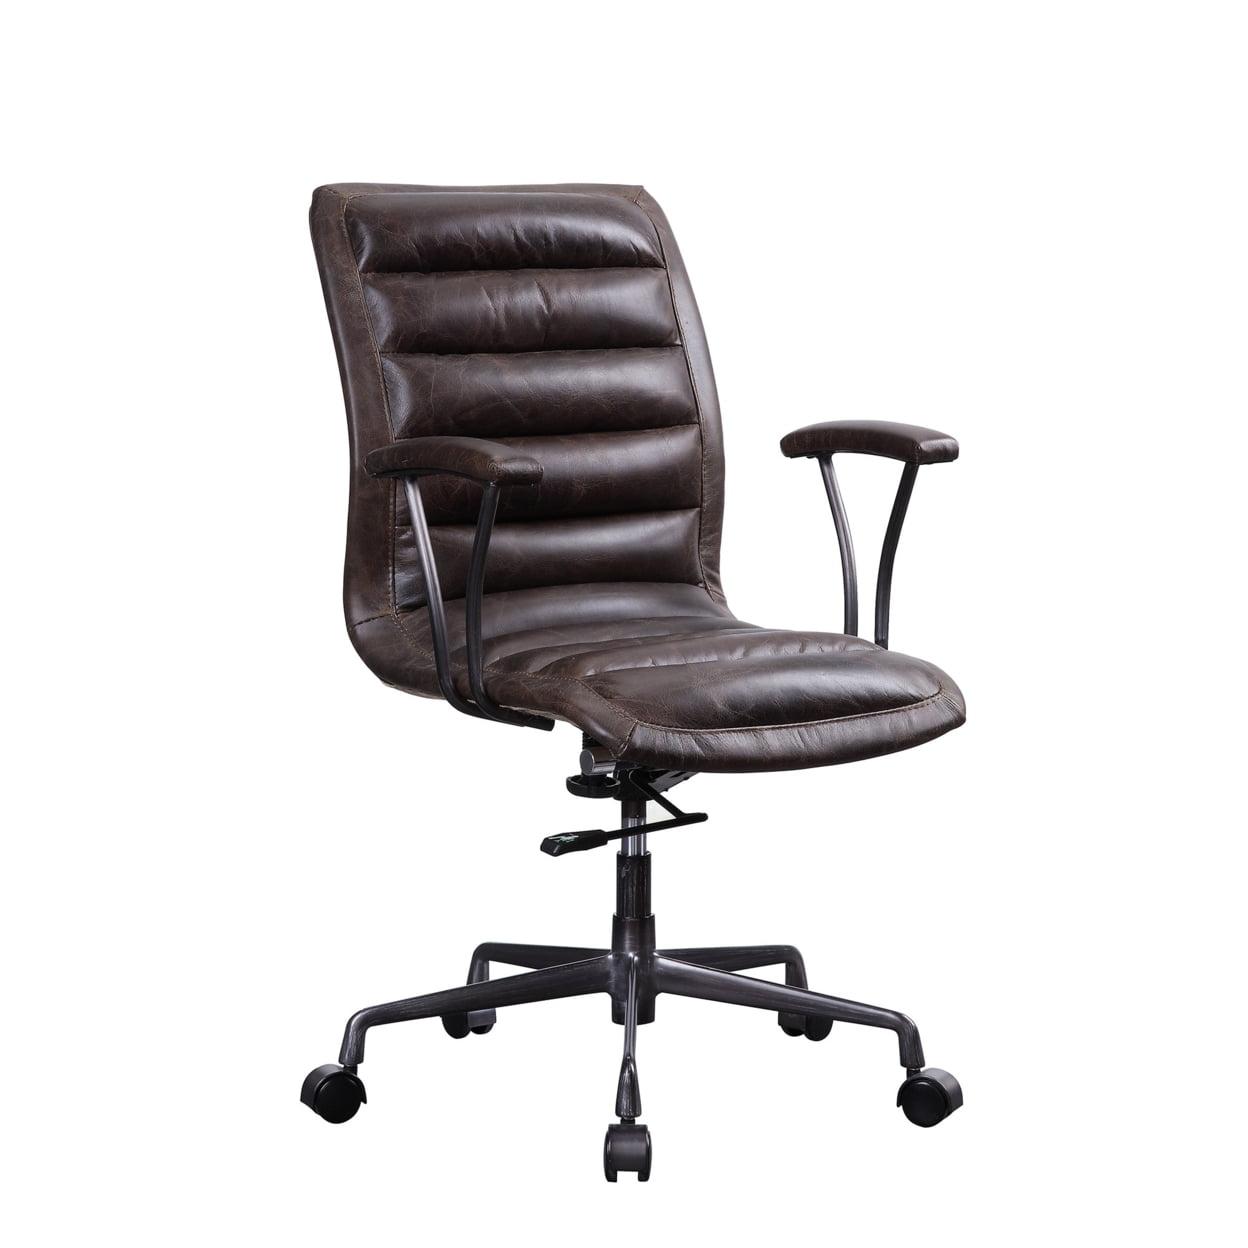 Distressed Brown Leather Executive Swivel Office Chair